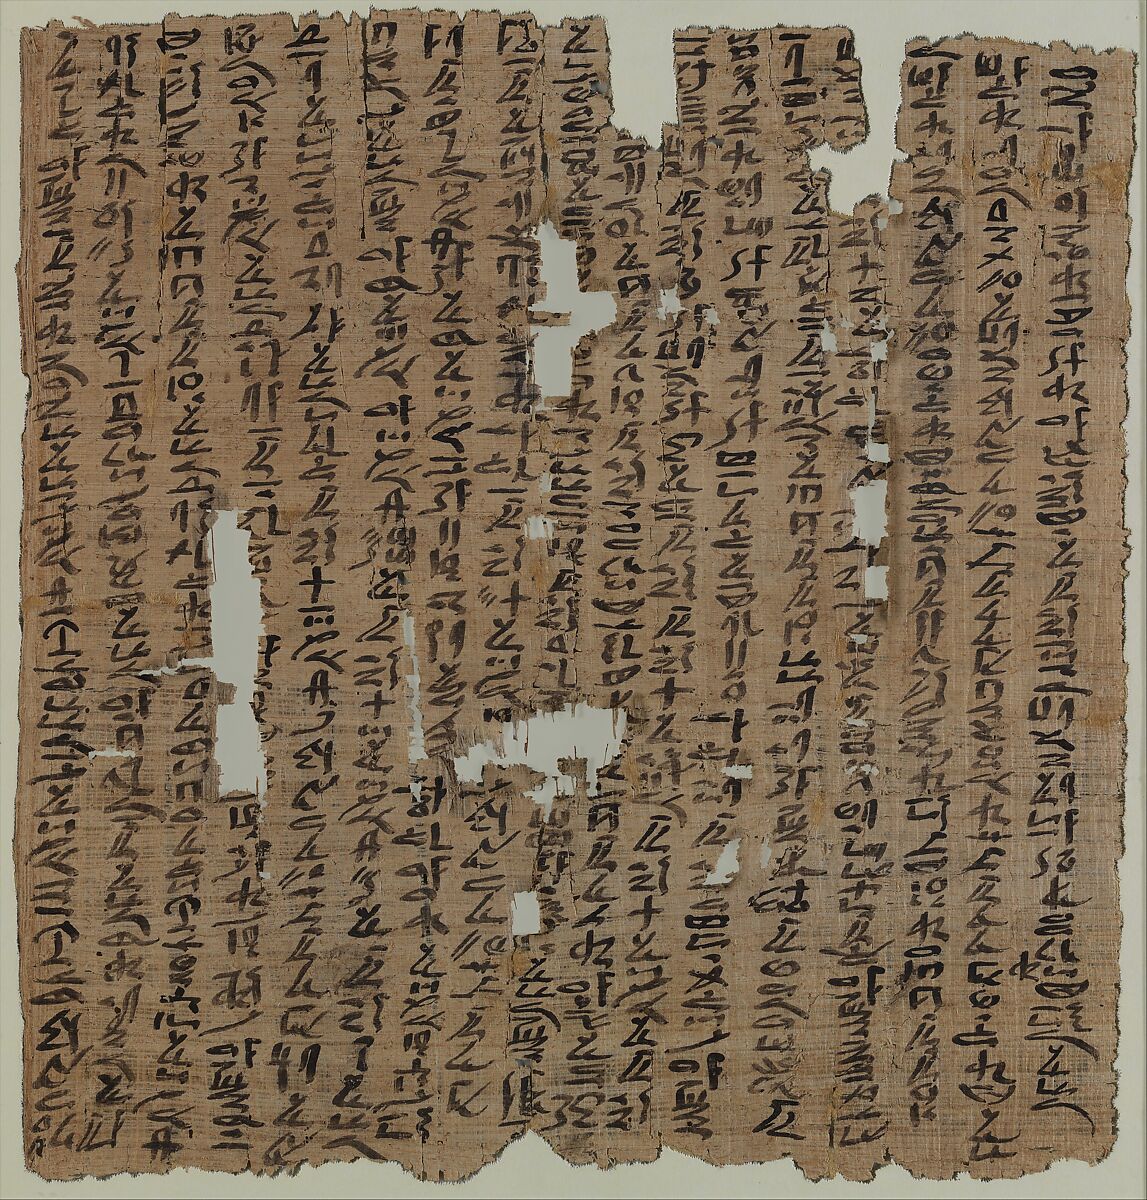 Heqanakht Letter I, Papyrus, ink 